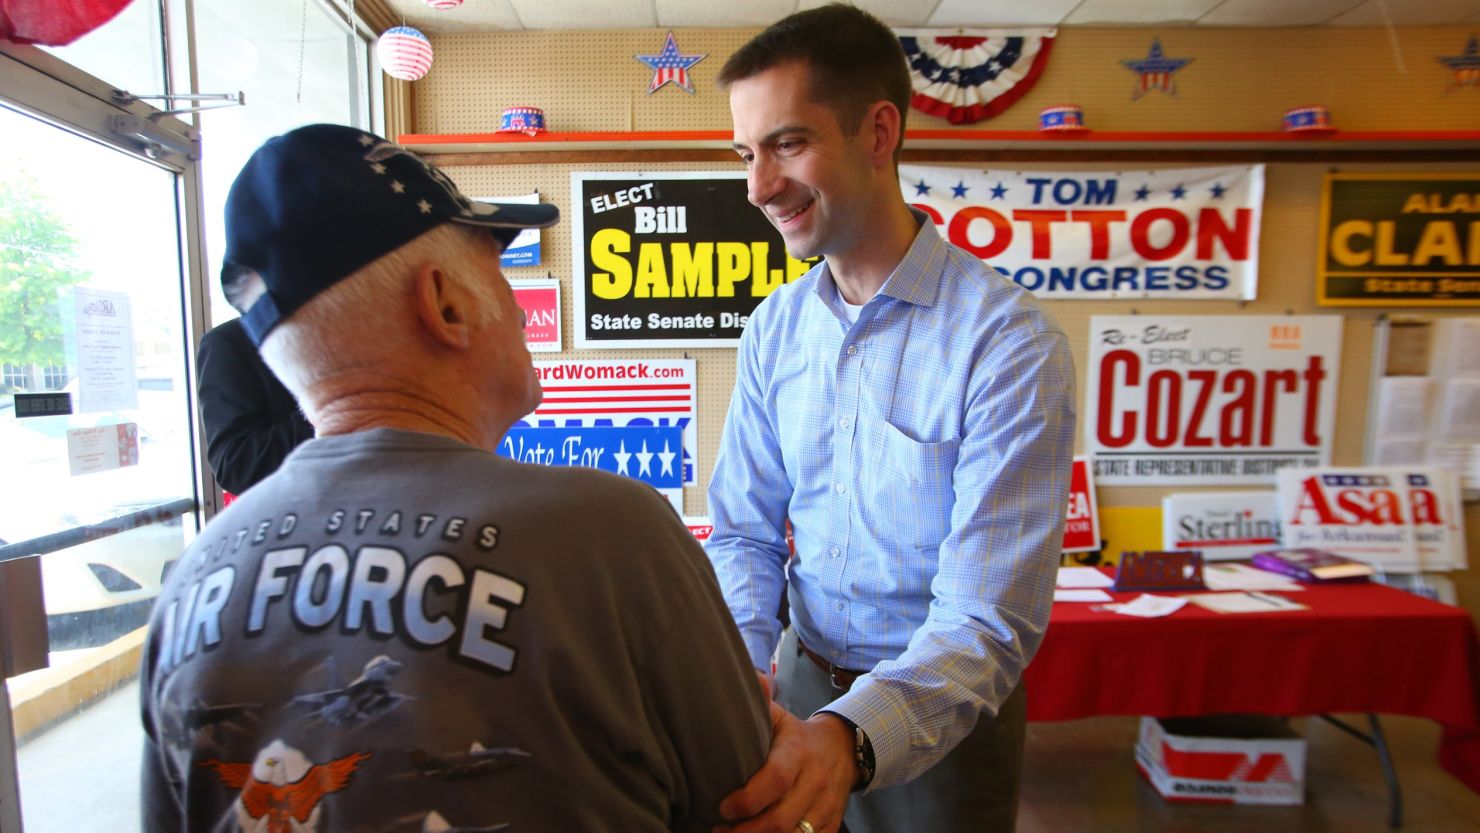 U.S. Rep. Tom Cotton , right, greets George Edwards, left, after Cotton addressed a crowd of supporters at a Republican headquarters office  April 26, 2014 in Hot Springs, Ark.